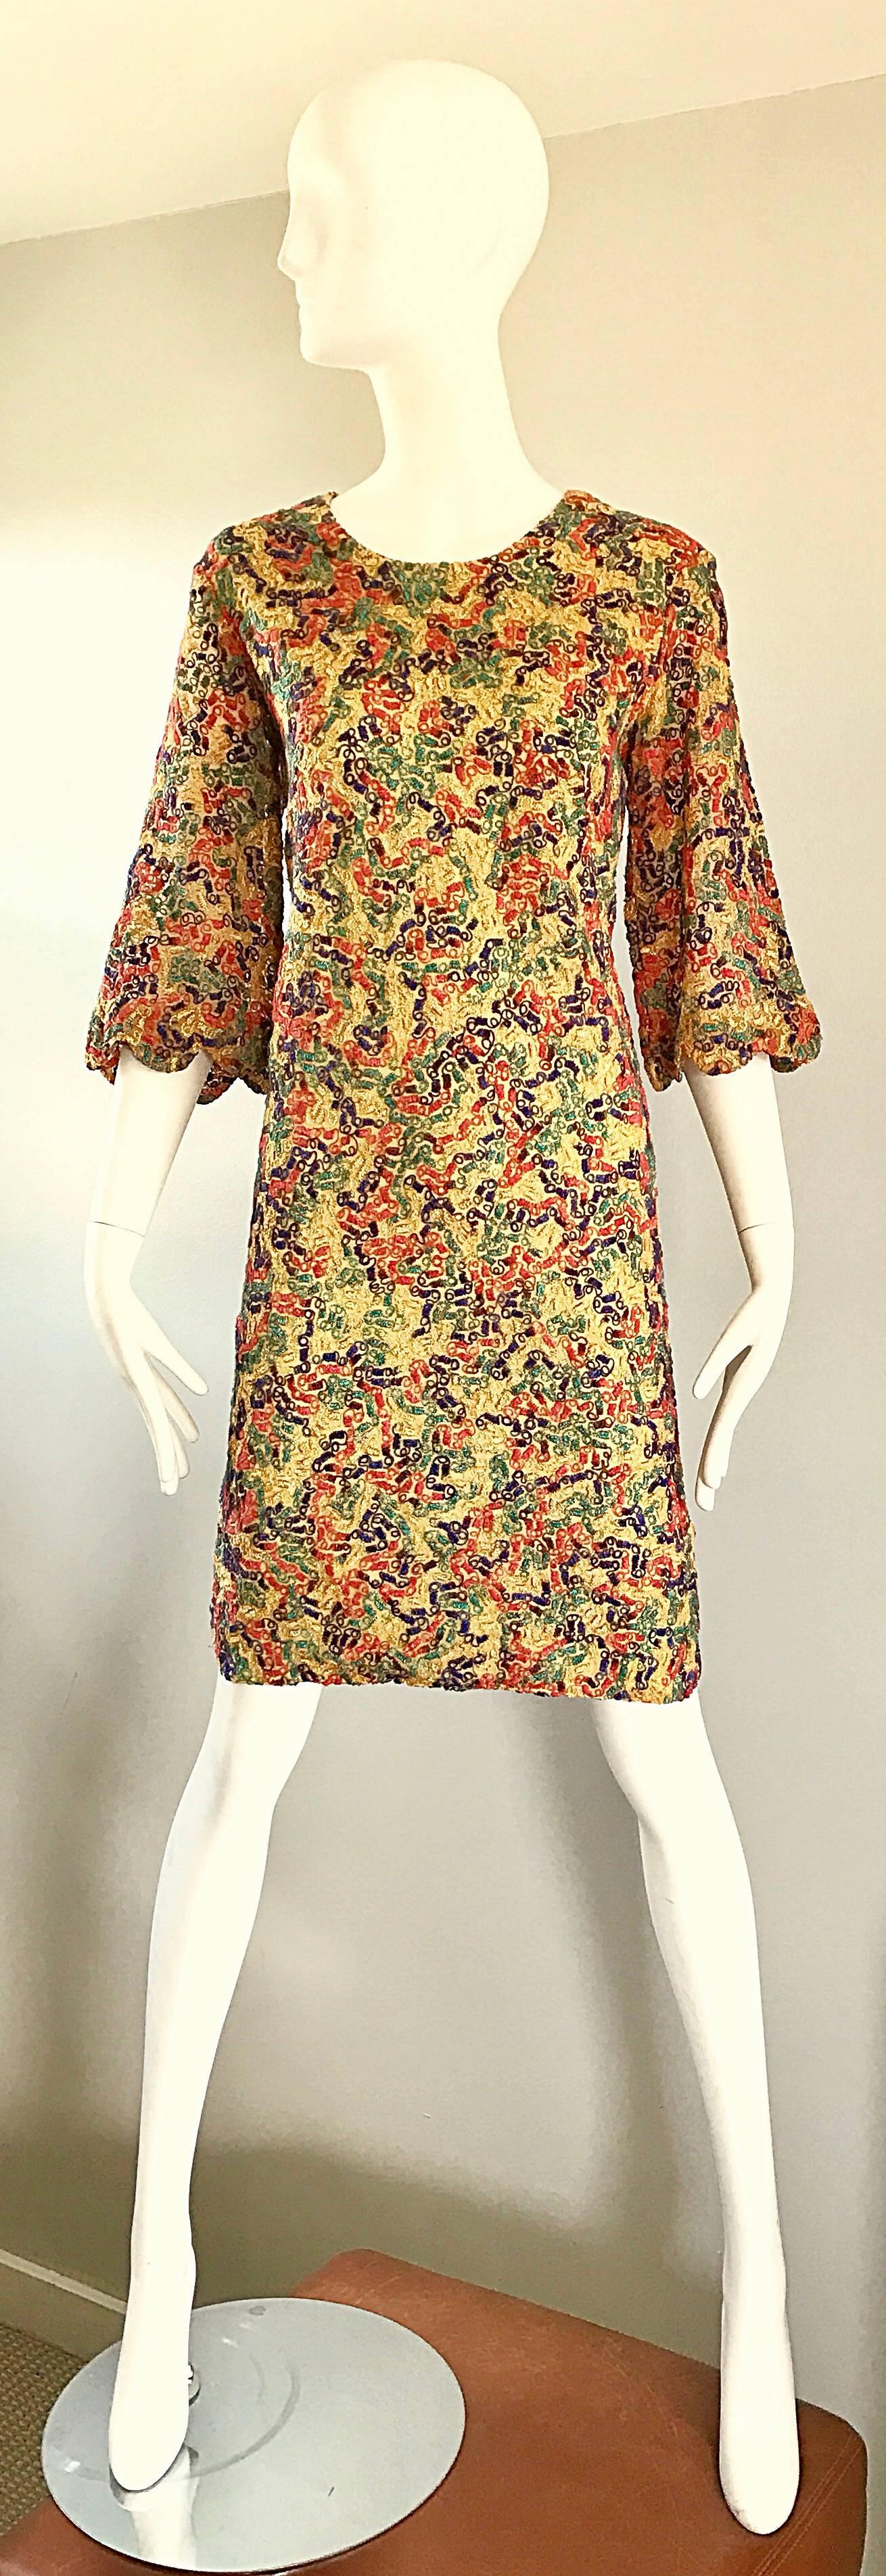 Amazing 1960s Colorful 60s Vintage Mod Shift Dress w/ Scalloped Bell Sleeves For Sale 2